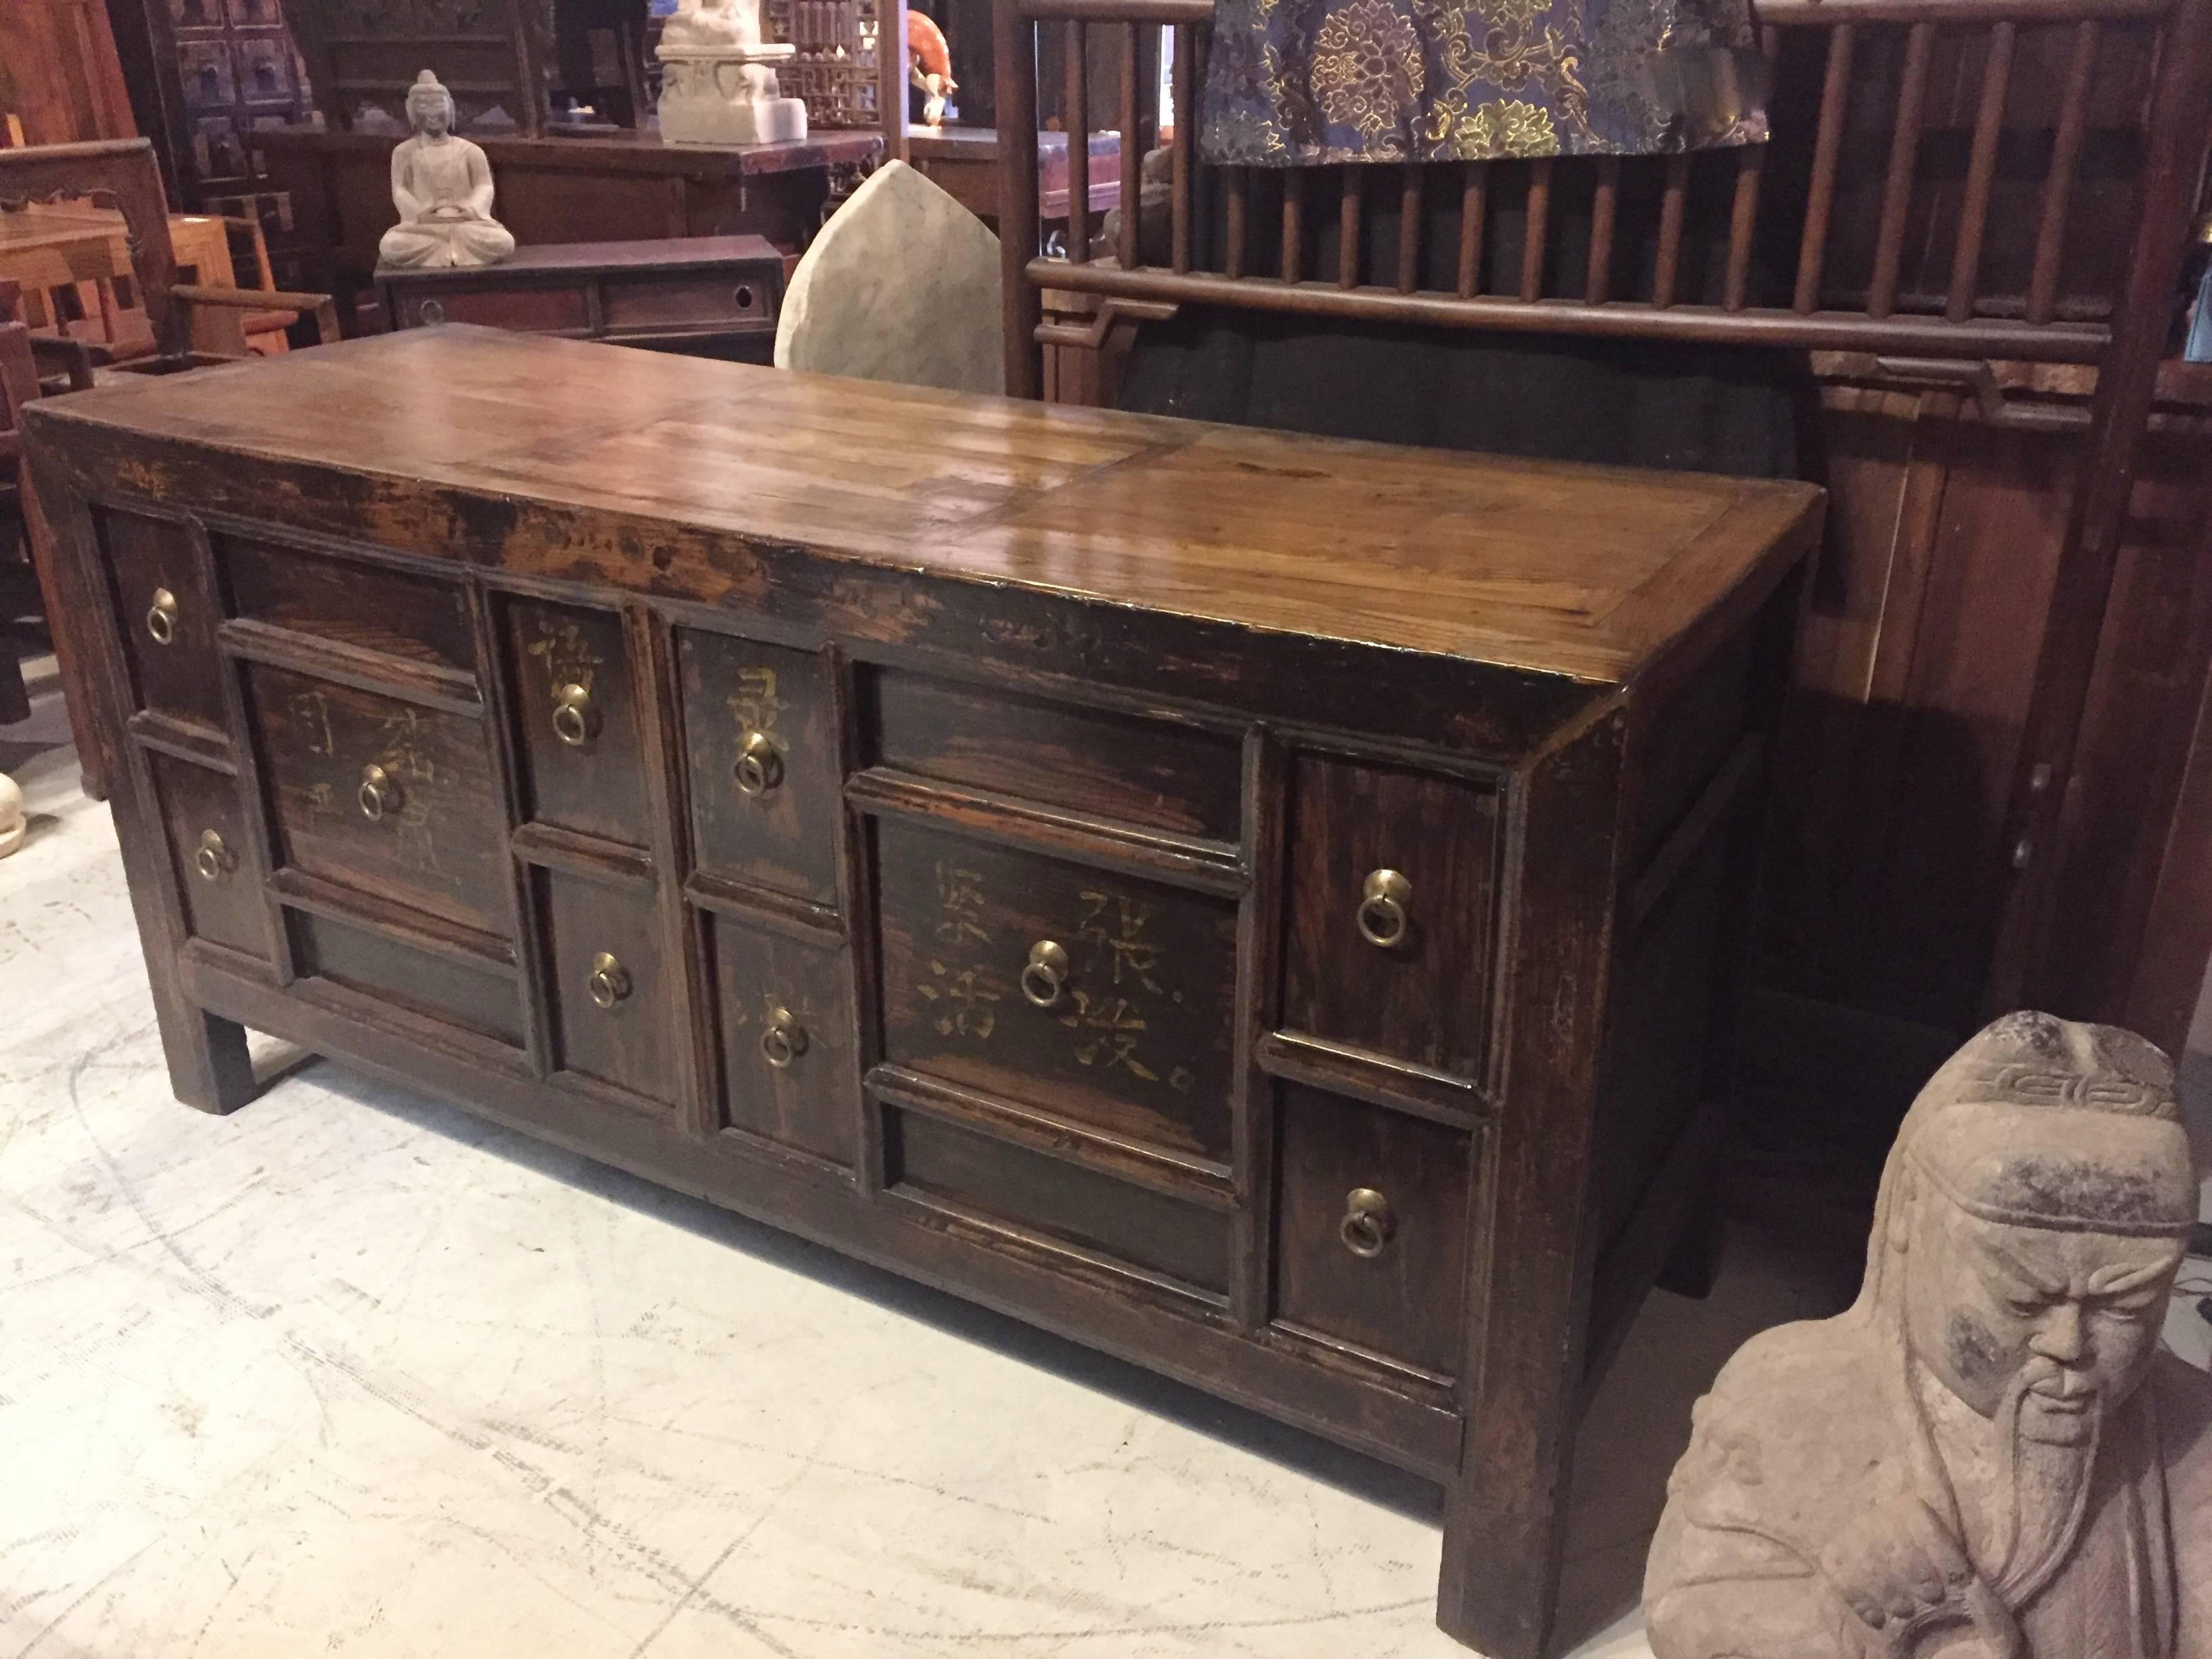 This is a heavy, substantial chest made with thick wood. The framework and top are solid and strong. There are 10 drawers with remnants of old writings on the front. They say 